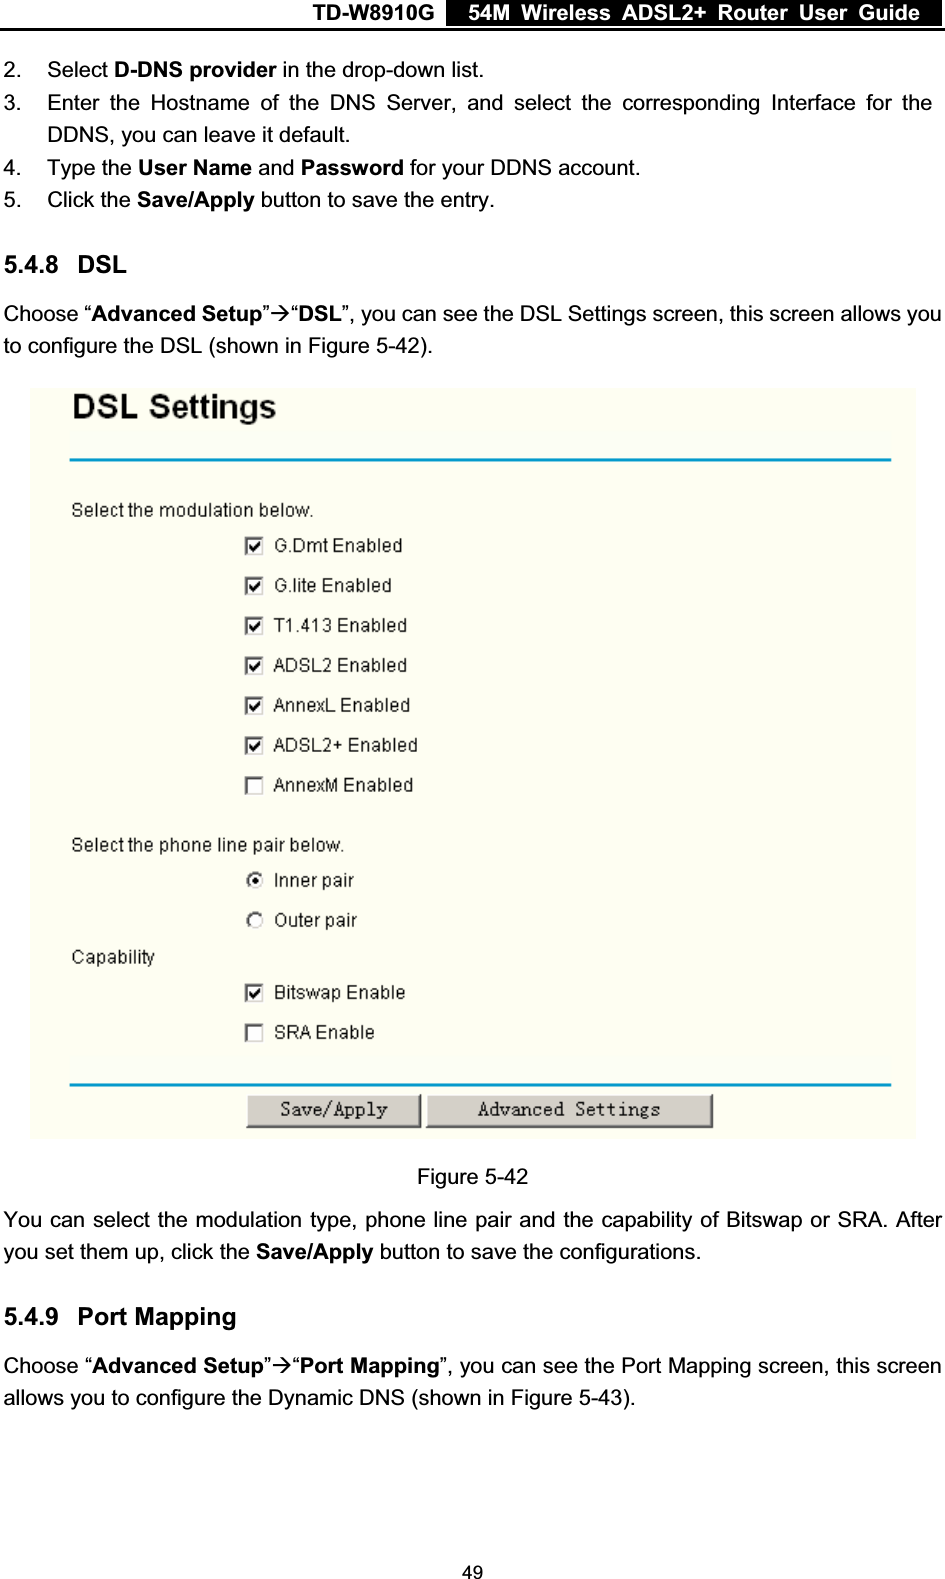 TD-W8910G    54M Wireless ADSL2+ Router User Guide  2. Select D-DNS provider in the drop-down list. 3.  Enter the Hostname of the DNS Server, and select the corresponding Interface for the DDNS, you can leave it default. 4. Type the User Name and Password for your DDNS account. 5. Click the Save/Apply button to save the entry. 5.4.8 DSLChoose “Advanced Setup”Æ“DSL”, you can see the DSL Settings screen, this screen allows you to configure the DSL (shown in Figure 5-42).Figure 5-42 You can select the modulation type, phone line pair and the capability of Bitswap or SRA. After you set them up, click the Save/Apply button to save the configurations. 5.4.9 Port Mapping Choose “Advanced Setup”Æ“Port Mapping”, you can see the Port Mapping screen, this screen allows you to configure the Dynamic DNS (shown in Figure 5-43). 49